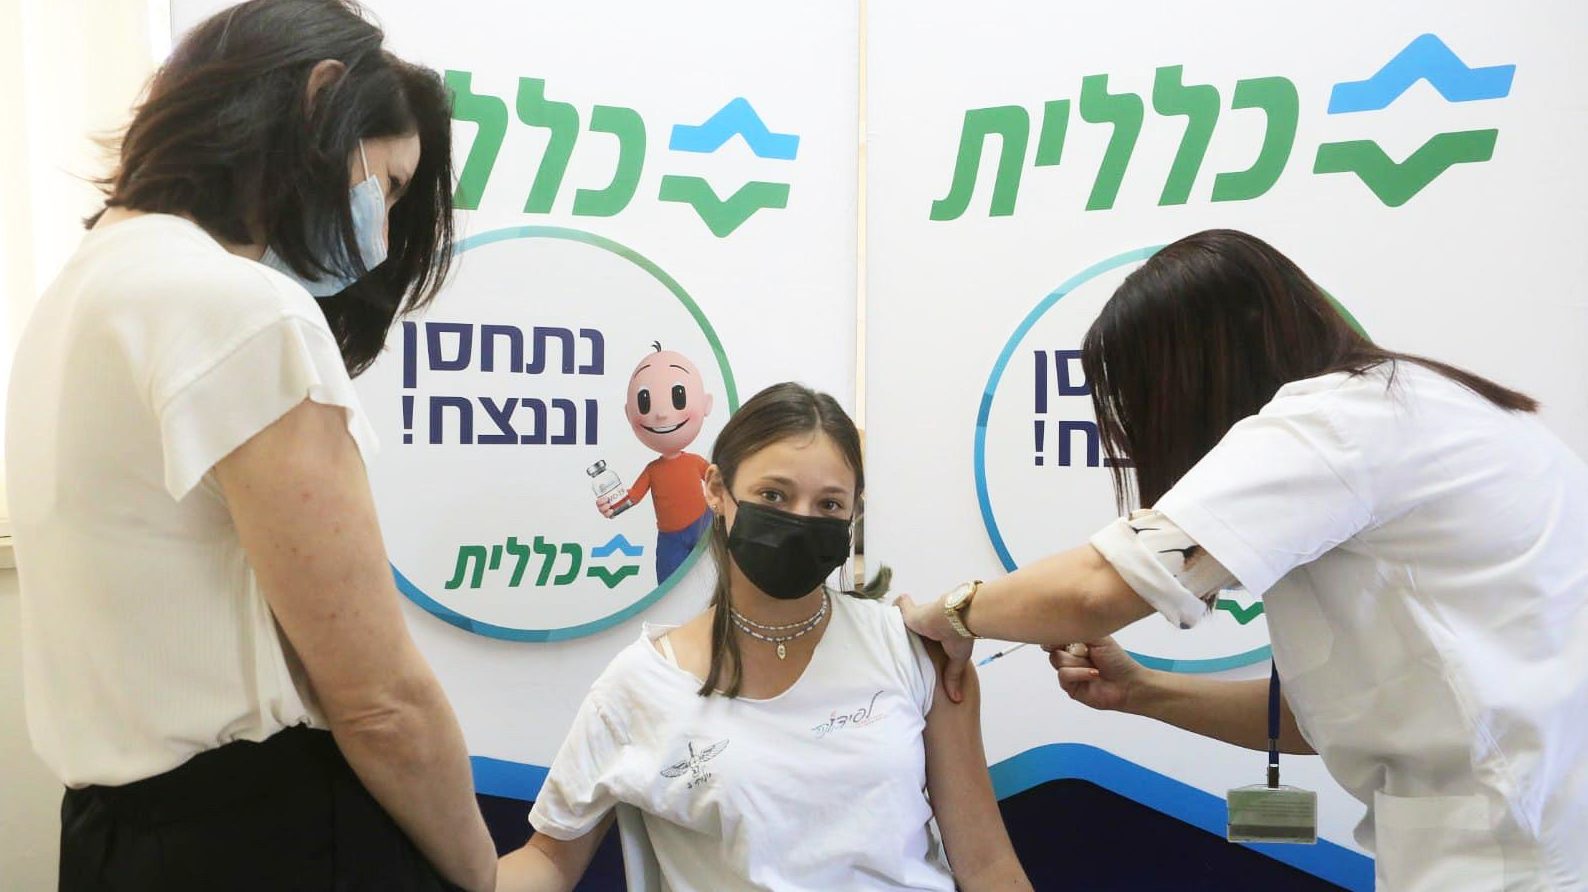 Youths Lining Up for Vaccines in Saudi Arabia, Israel